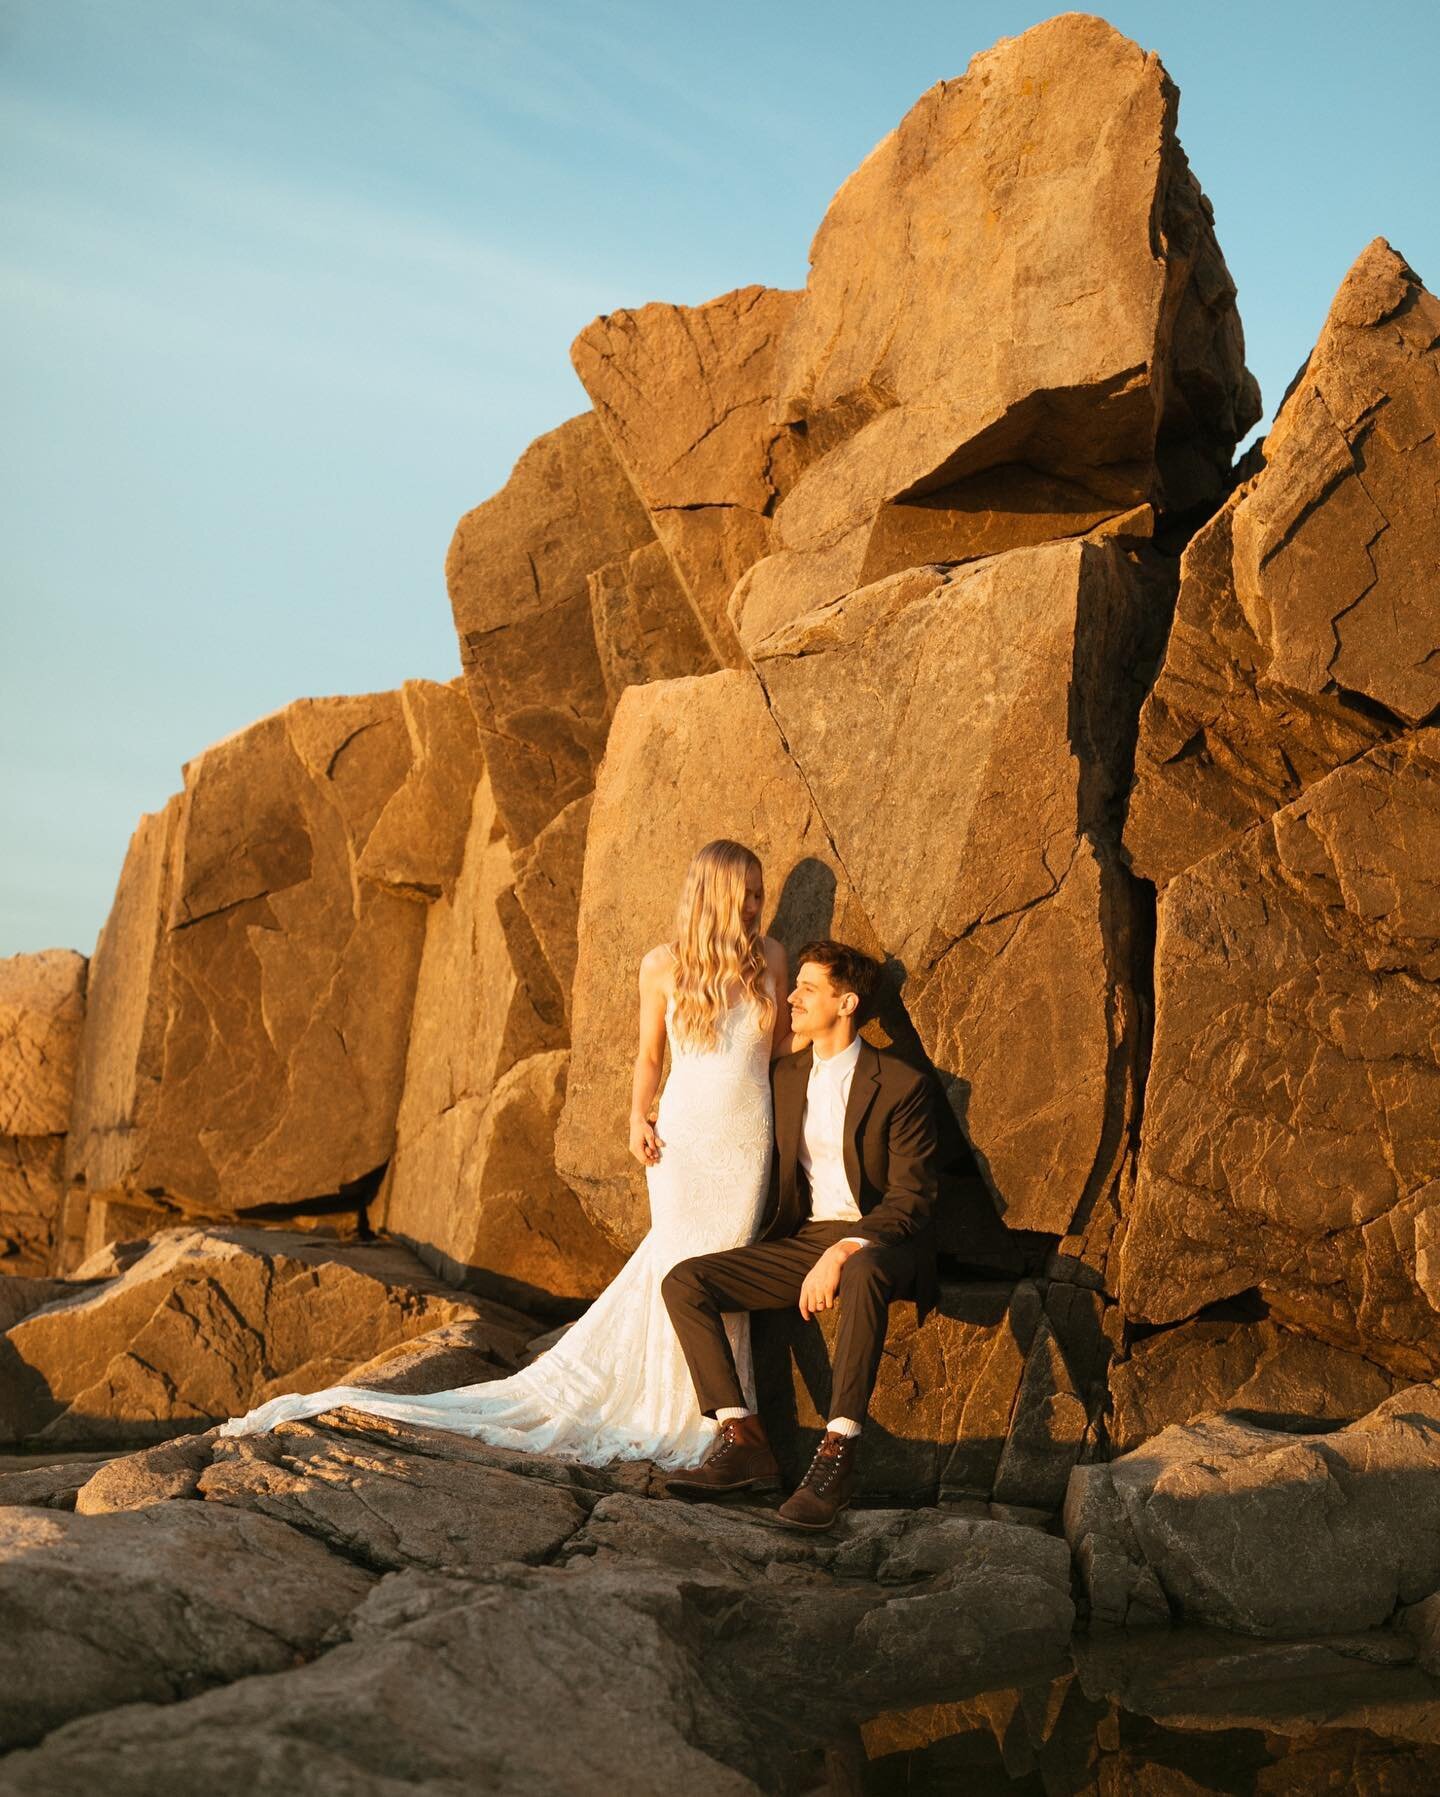 sharing part one of this sunrise elopement in acadia nat&rsquo;l park with two of the sweetest humans. 

their closest family and friends watched from above, as hannah&rsquo;s dad married her and wyatt at dawn, in a place they&rsquo;ve spent so much 